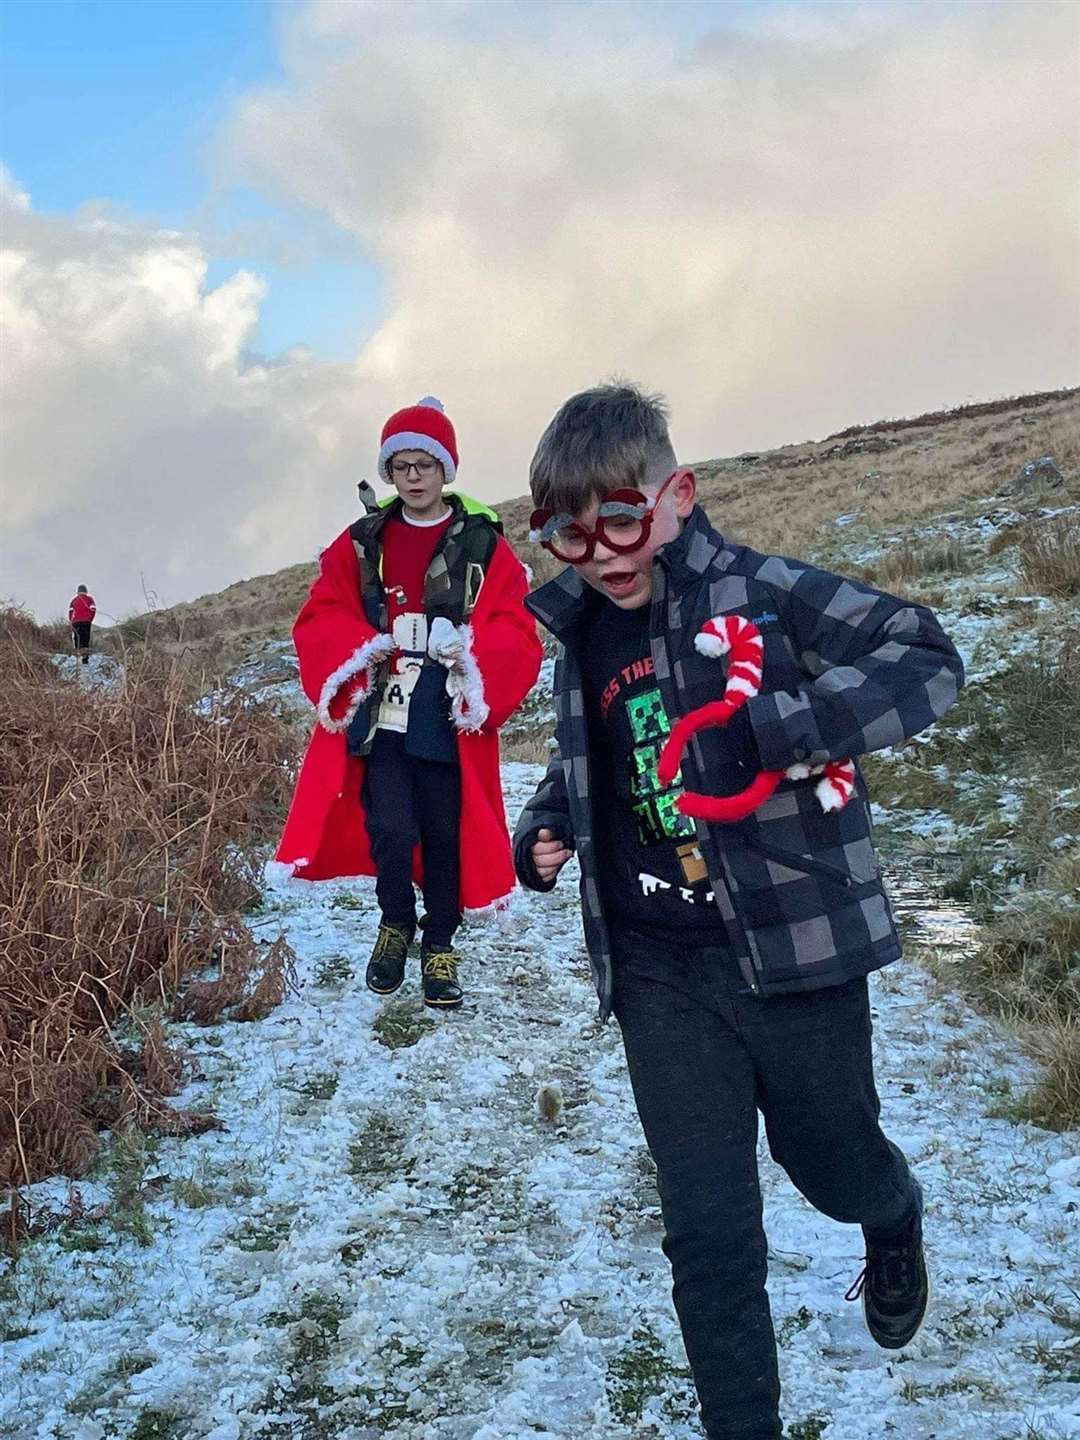 The route for the Santa Dash was part-way round Loch Innes.